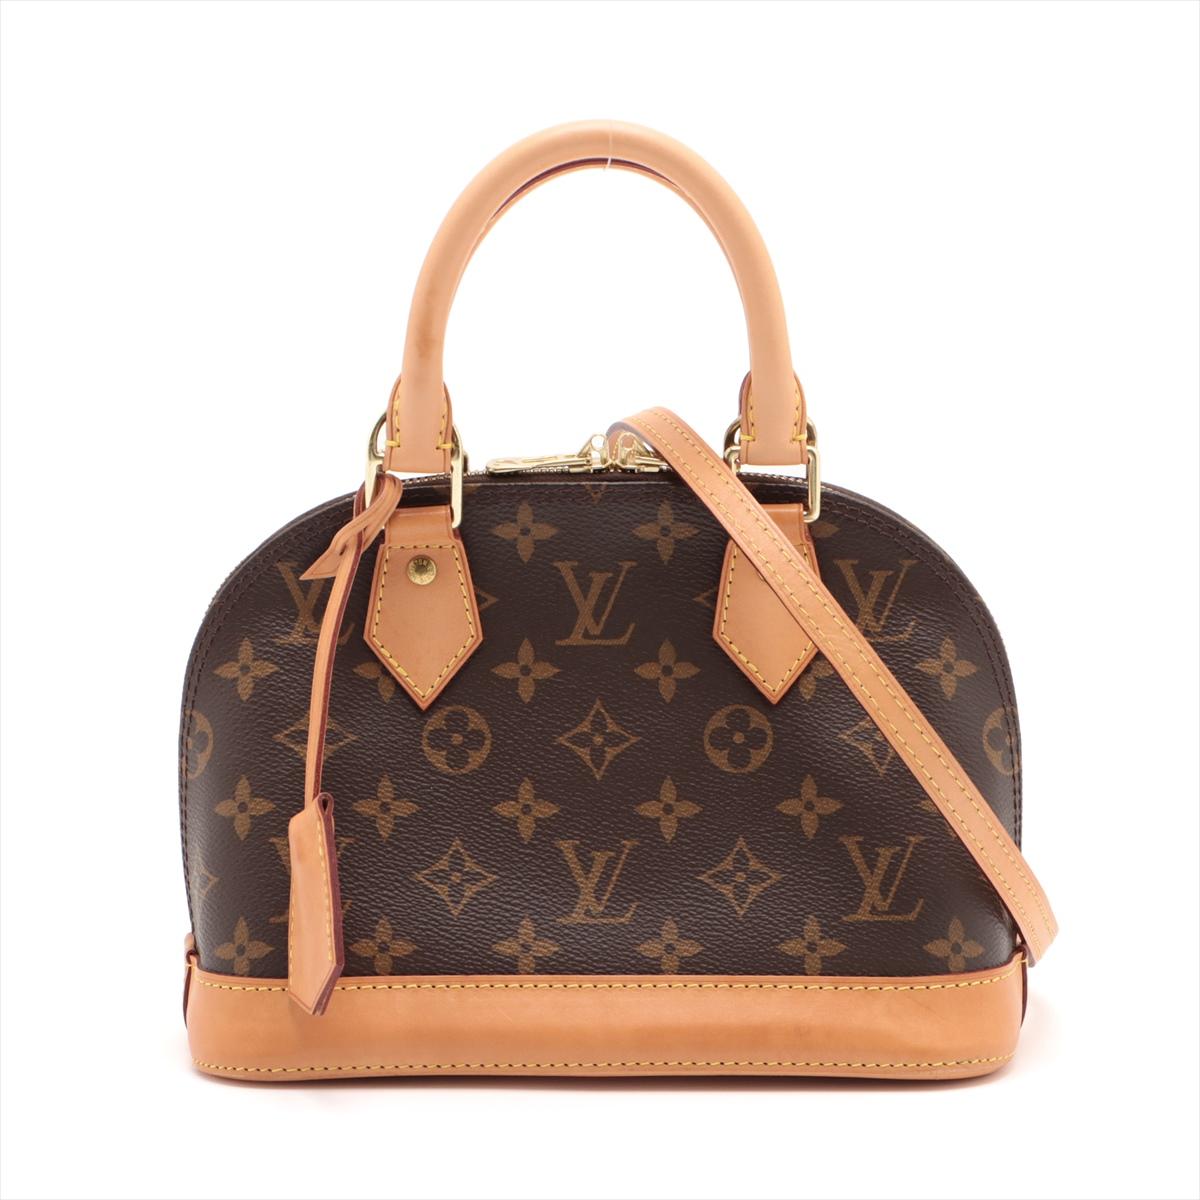 The Louis Vuitton Monogram Alma BB is an exquisite handbag that embodies the epitome of luxury and timeless style. Crafted from the brand's iconic Monogram canvas, its warm brown hue features the renowned LV monogram pattern, showcasing a signature